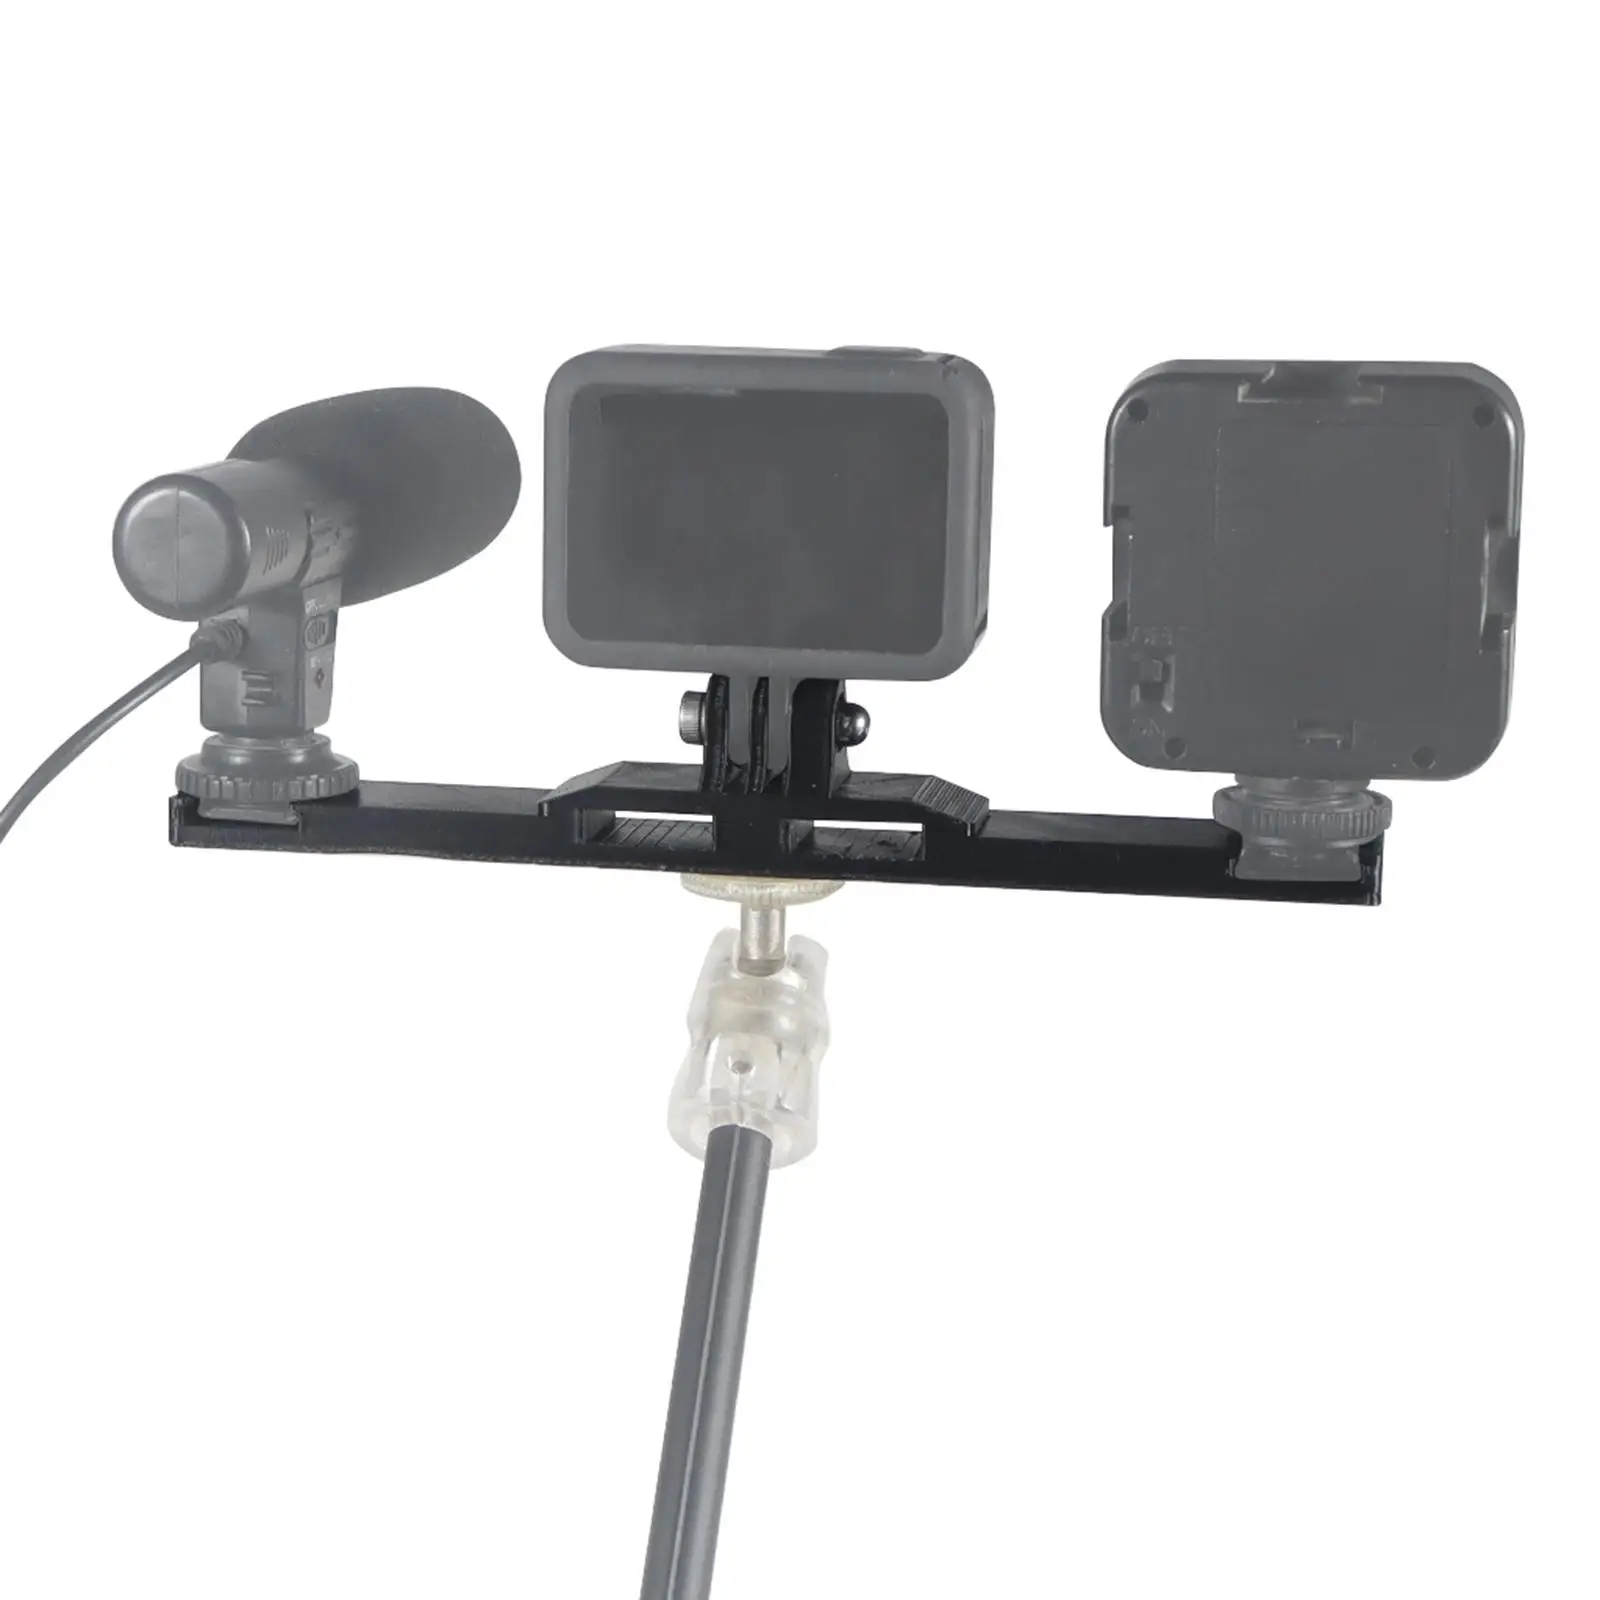 Double Head Cold Shoe Mount Bracket Pla Portable Lightweight Adapter stand Microphone Selfie Stick Tripod Light Stand